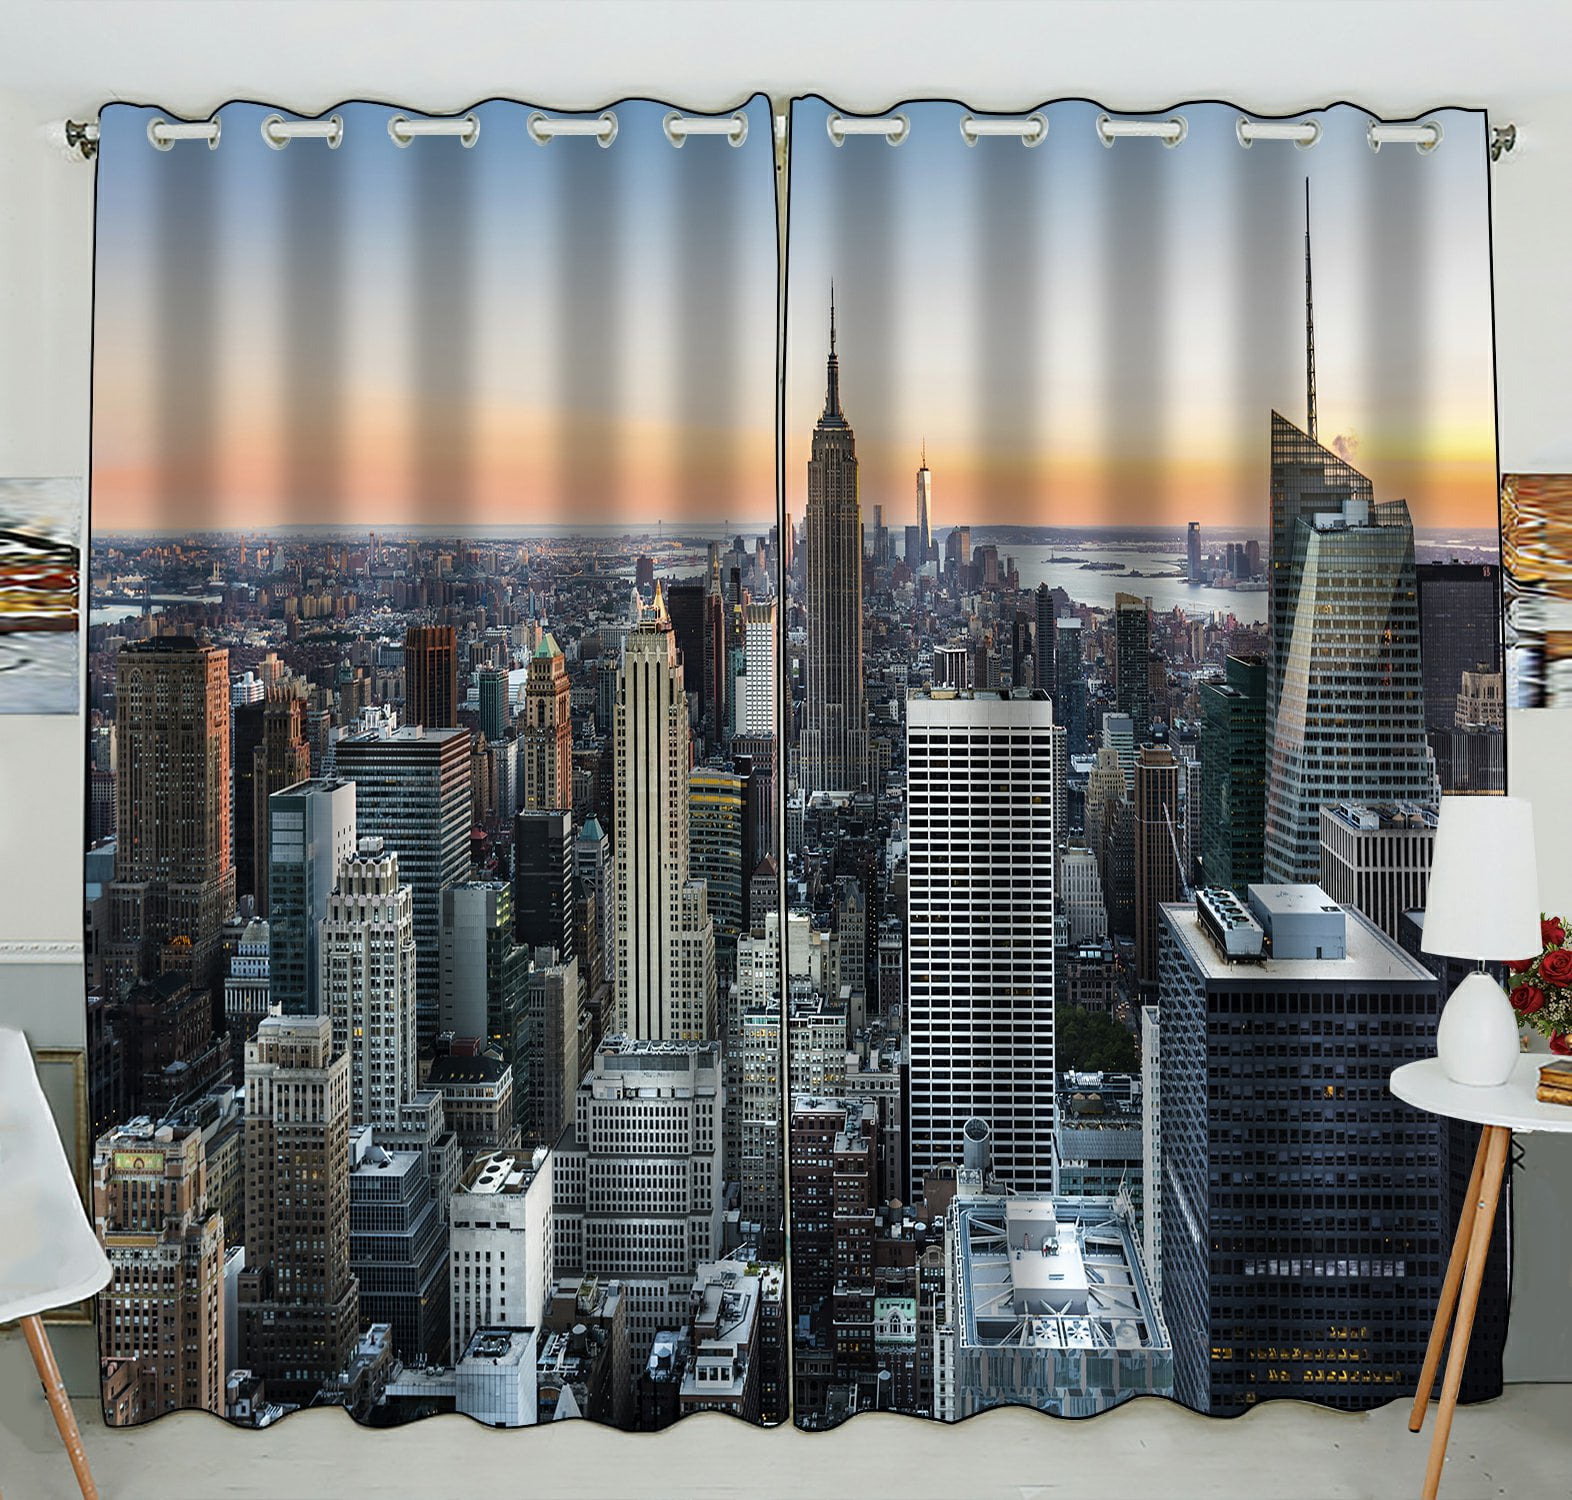 New York Curtains Global City Sunset Window Drapes 2 Panel Set 108x84 Inches 